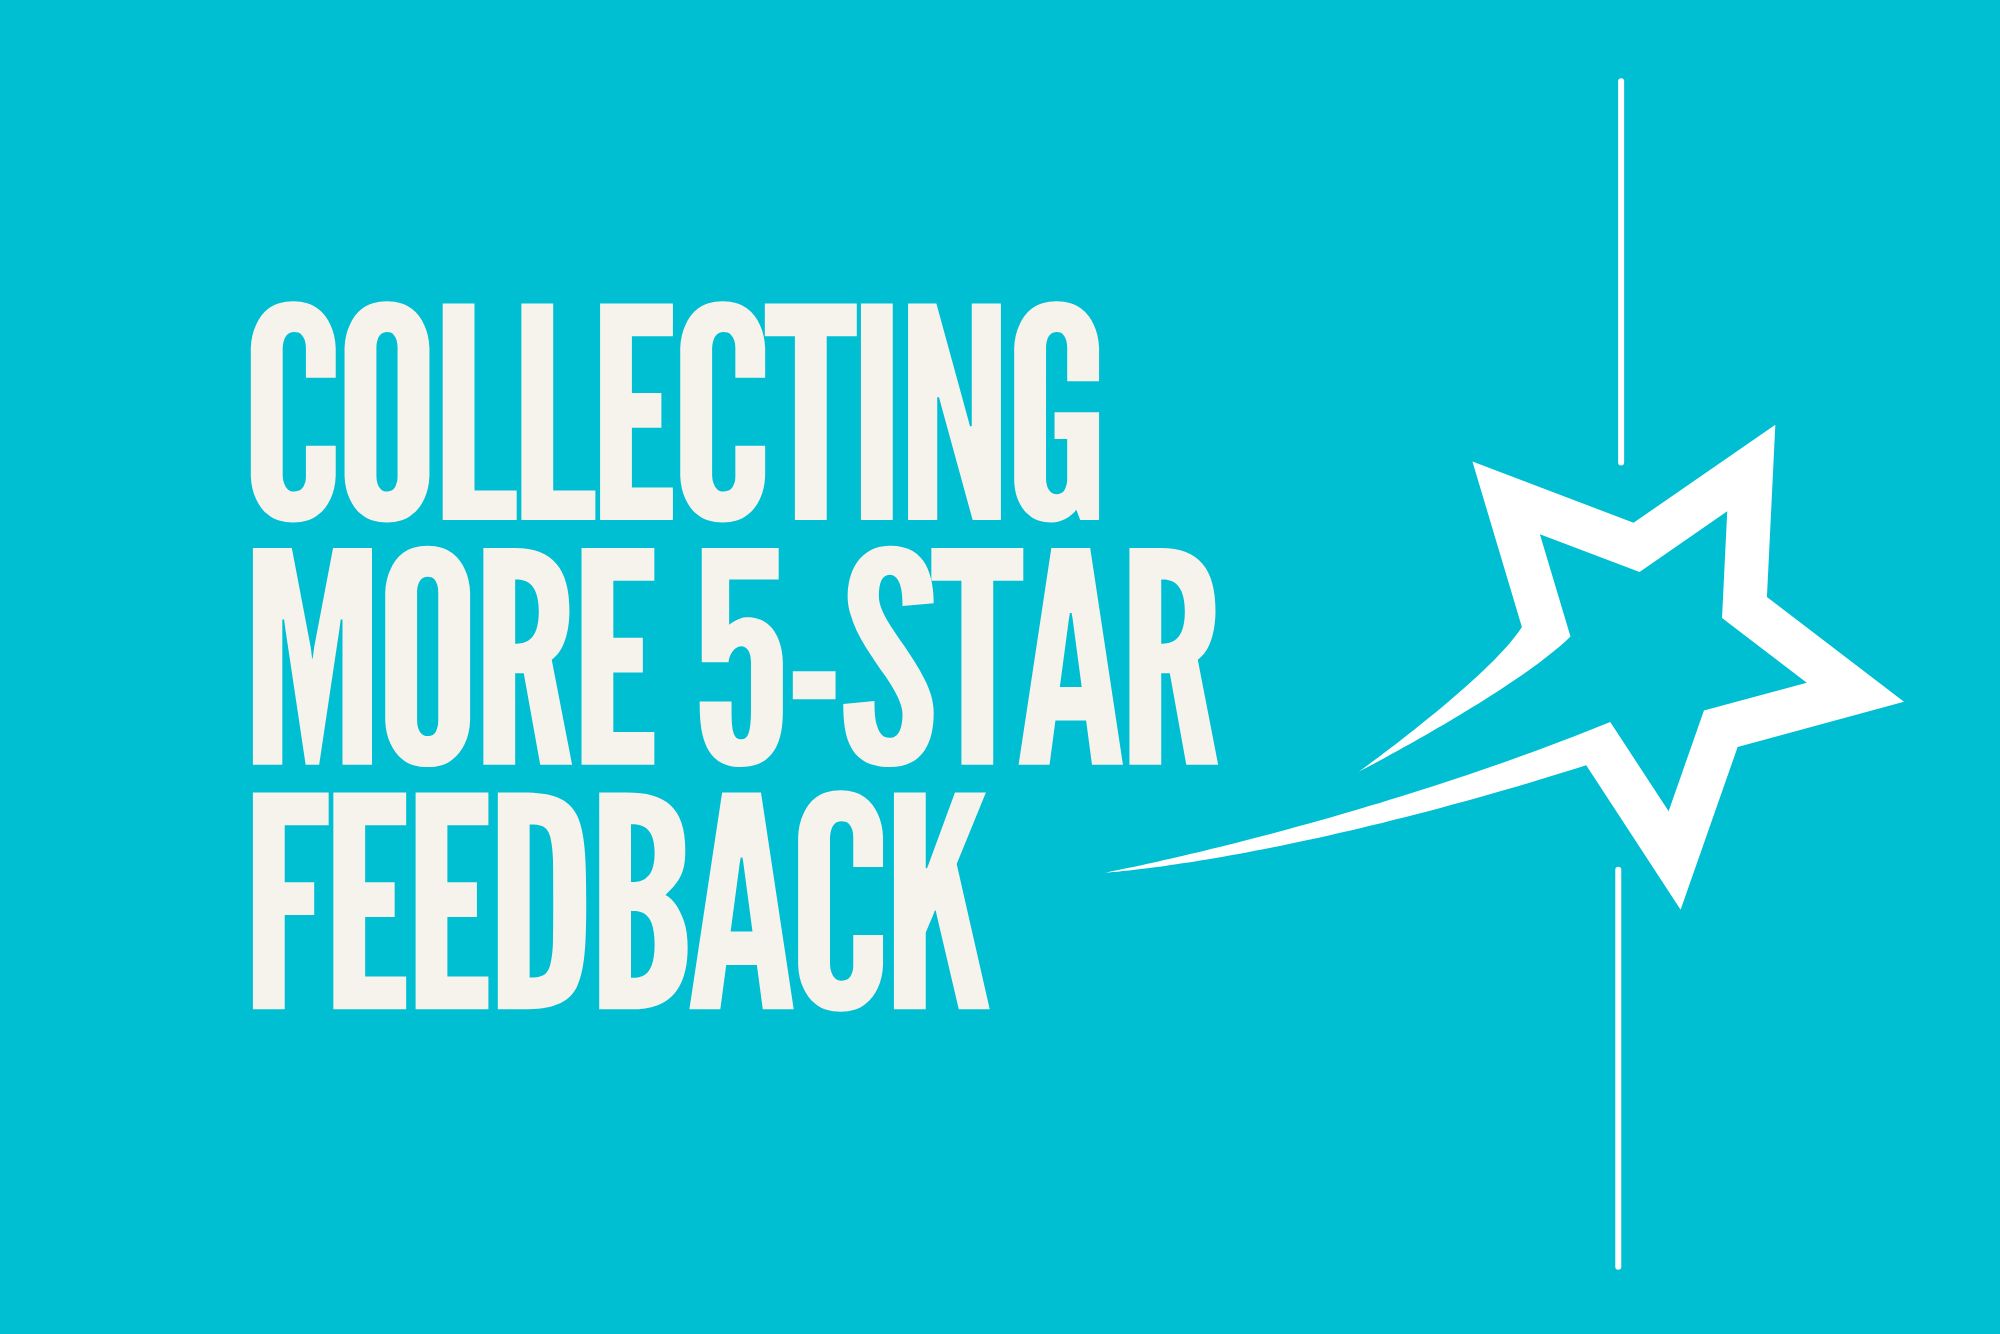 Collecting more 5-star feedback